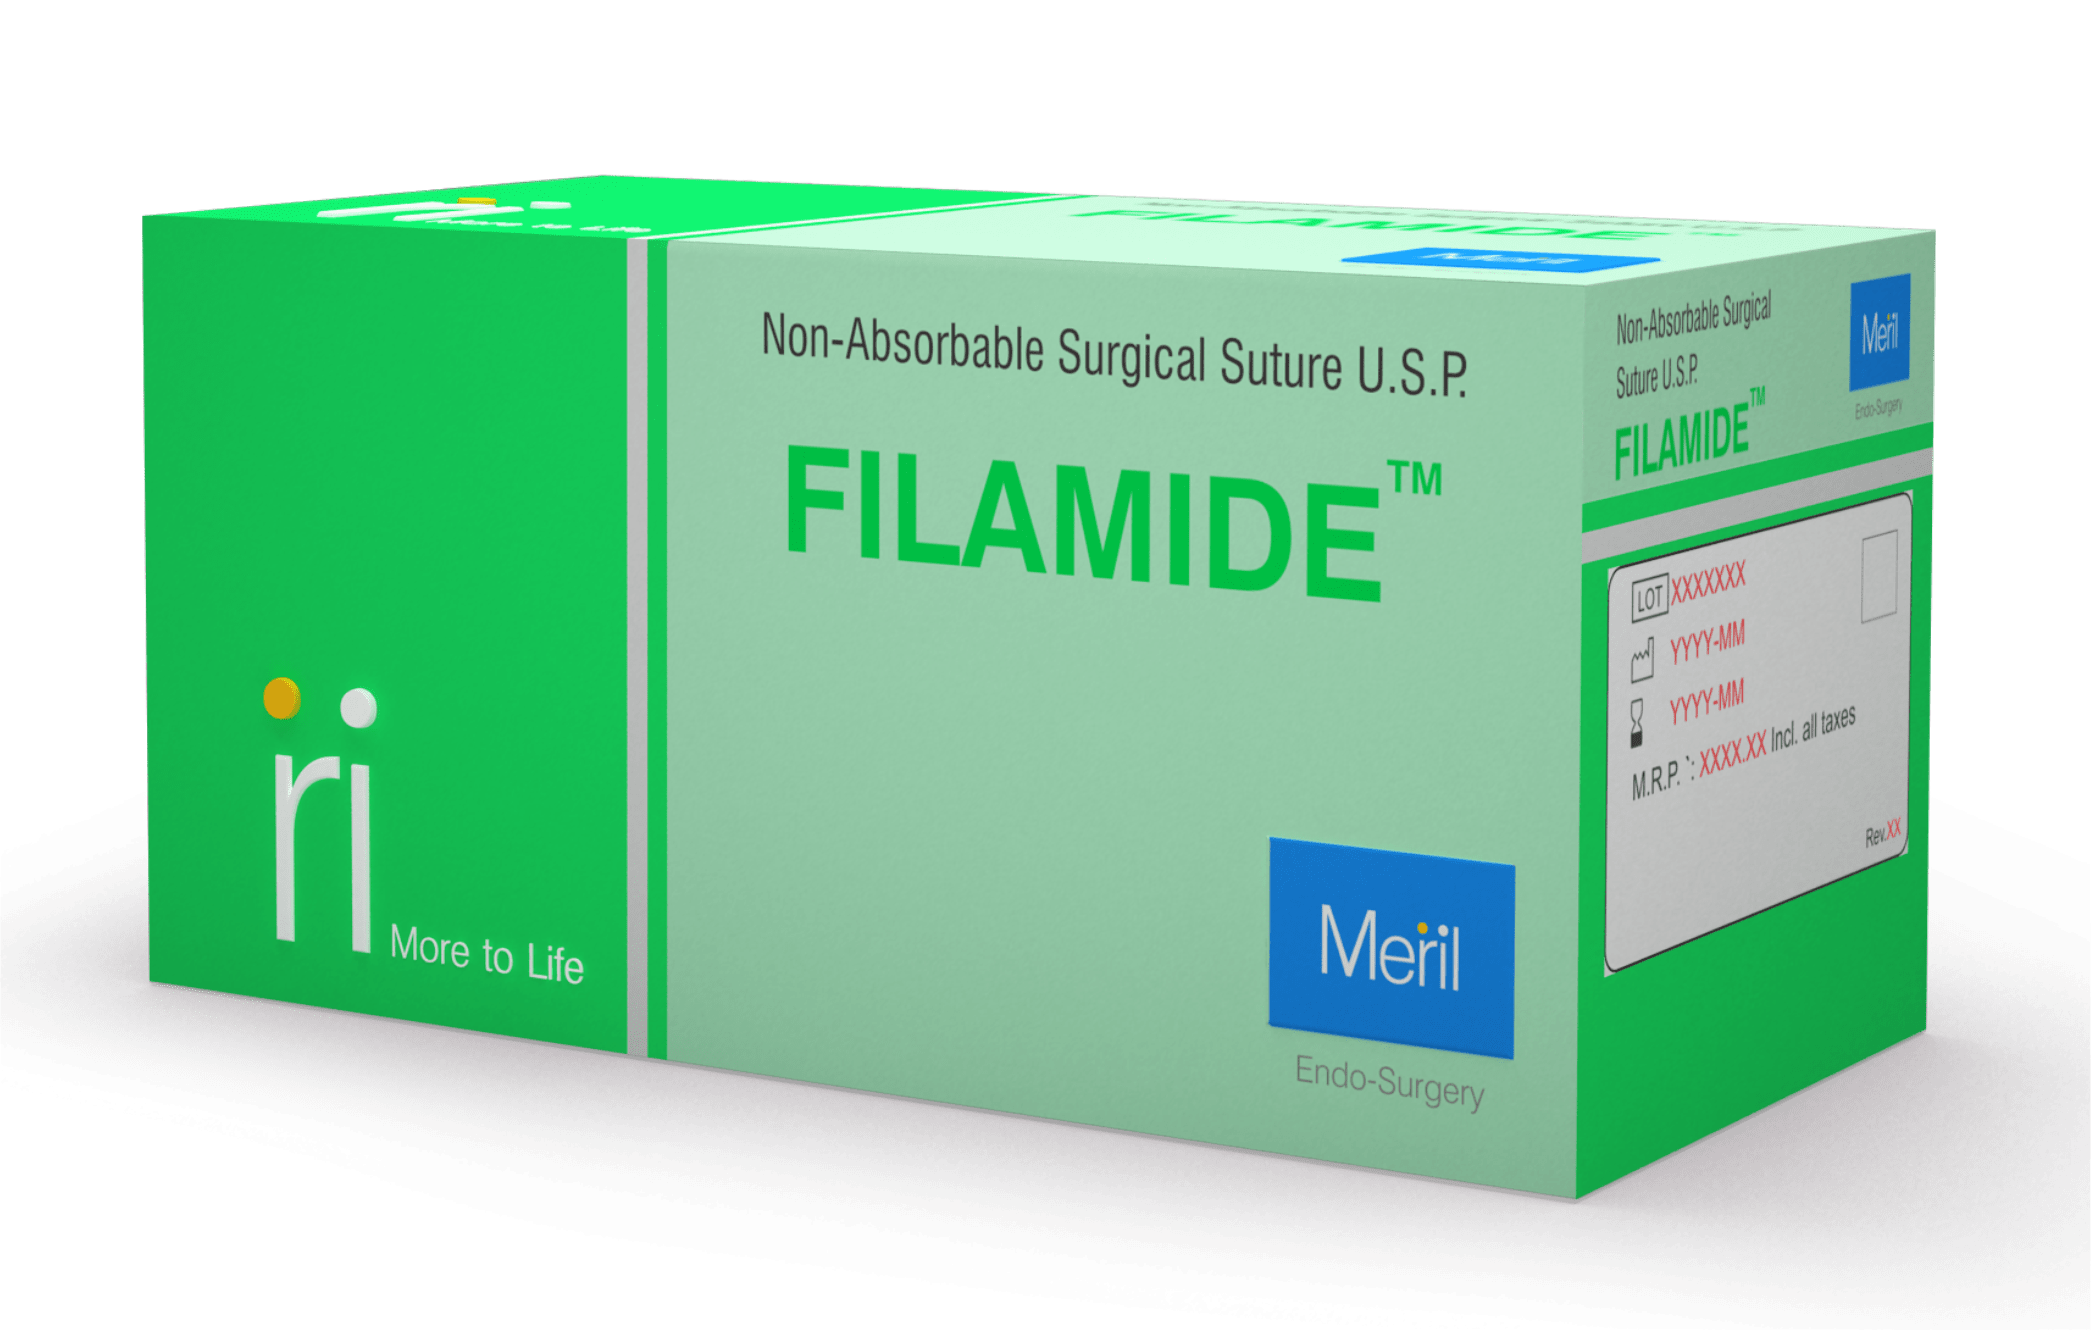 Filamide Non-Absorbable Surgical Suture